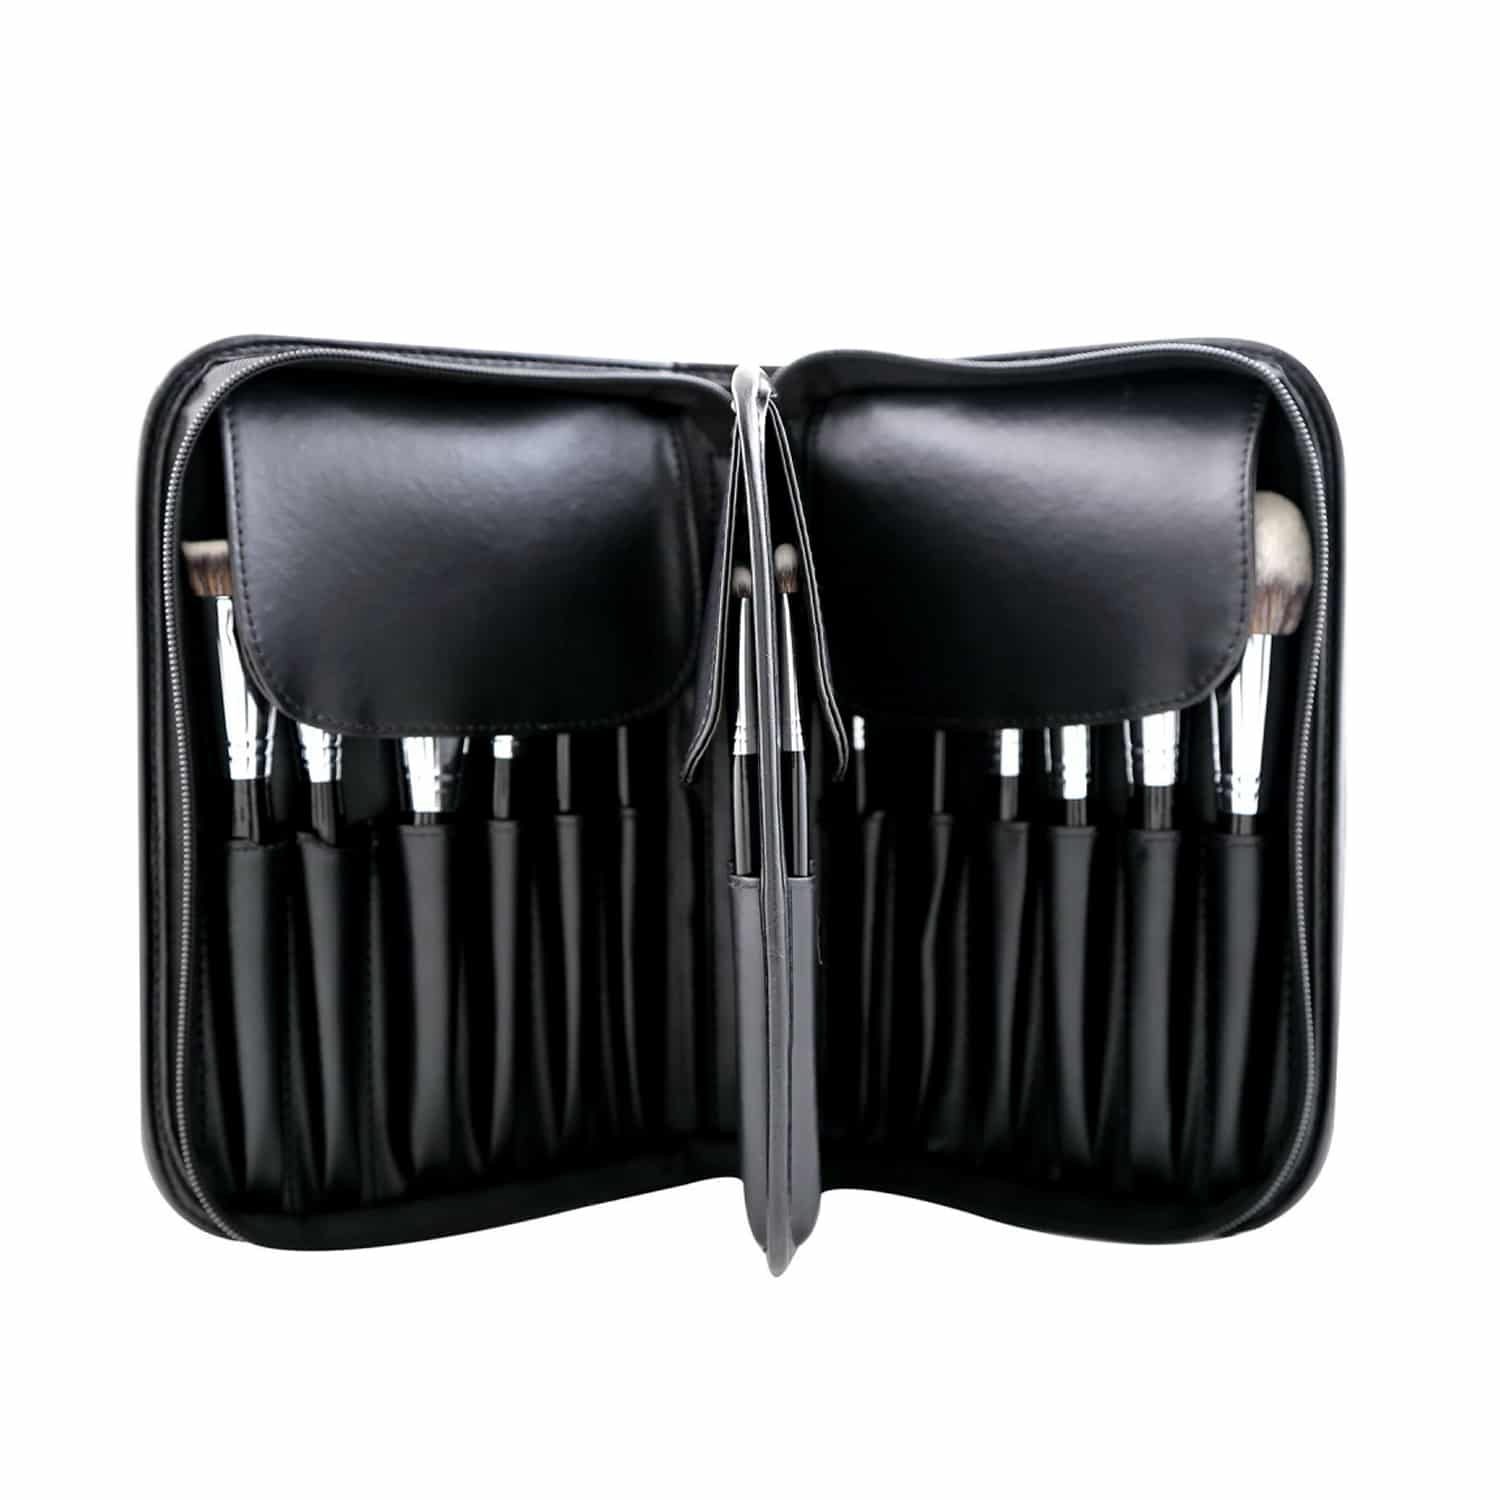 PAC Synthetic Series Brush Set (25 Brushes) PAC